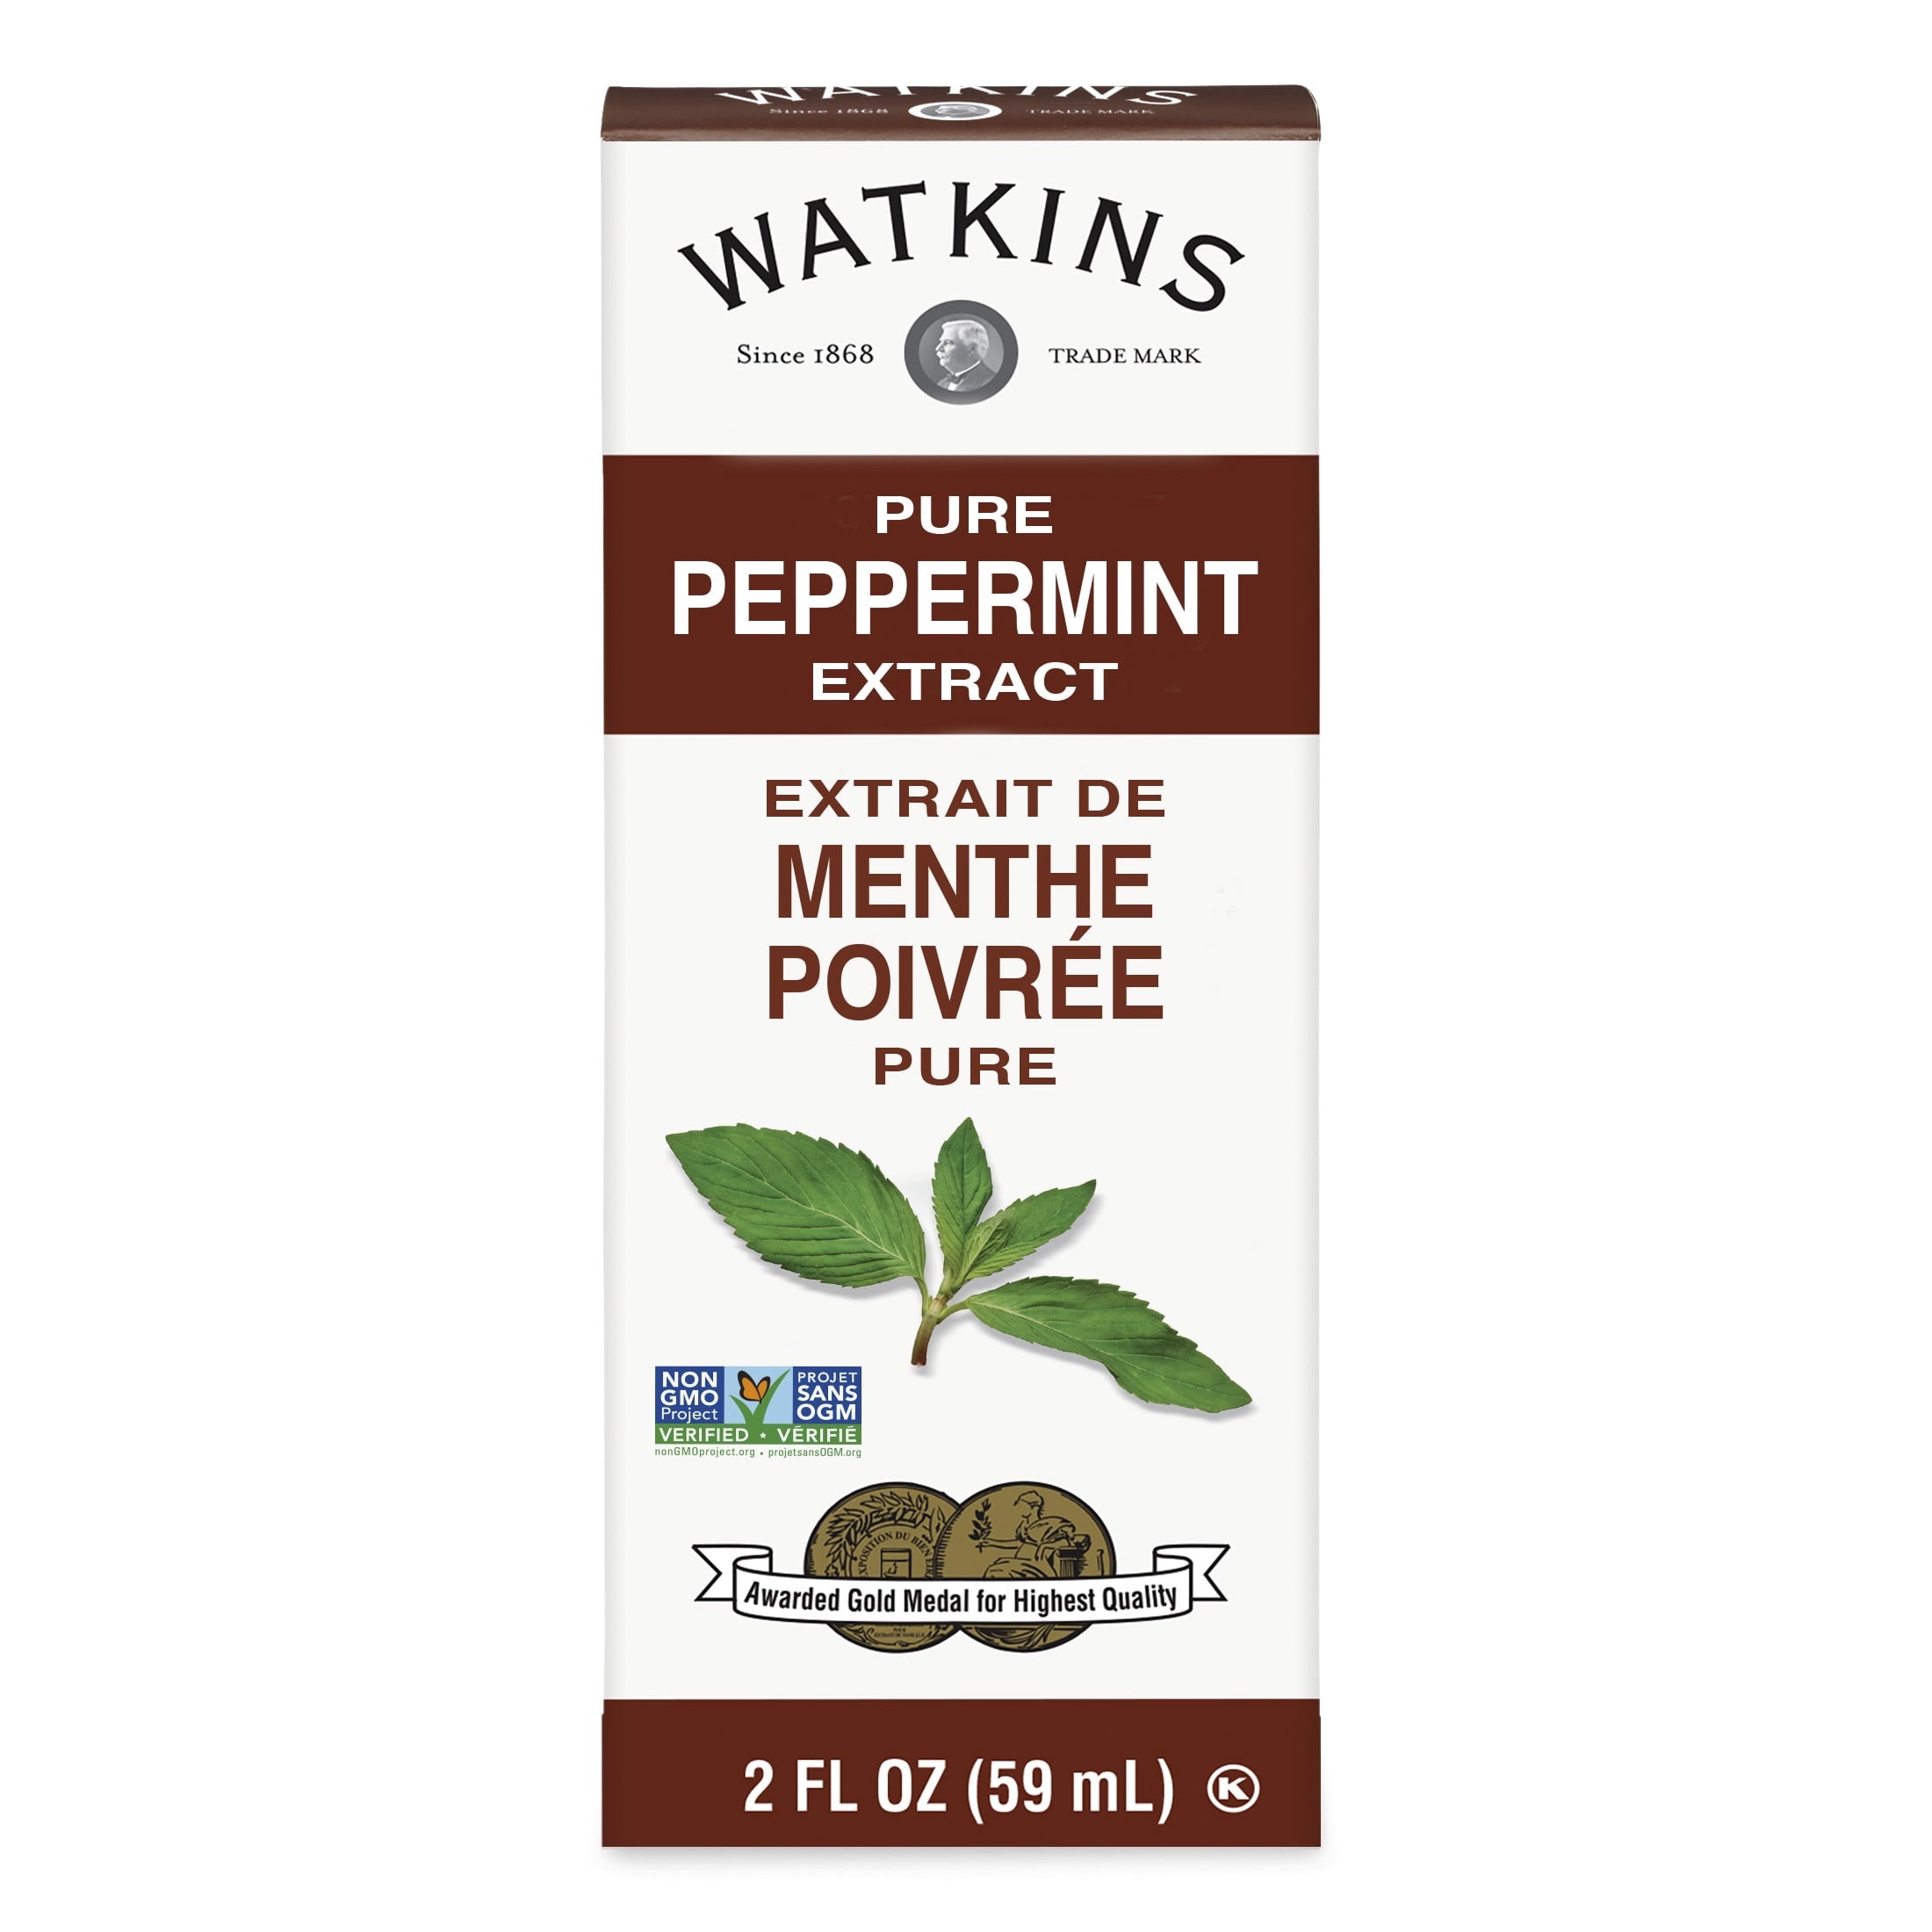 Watkins Peppermint Extract Pure 2 Oz